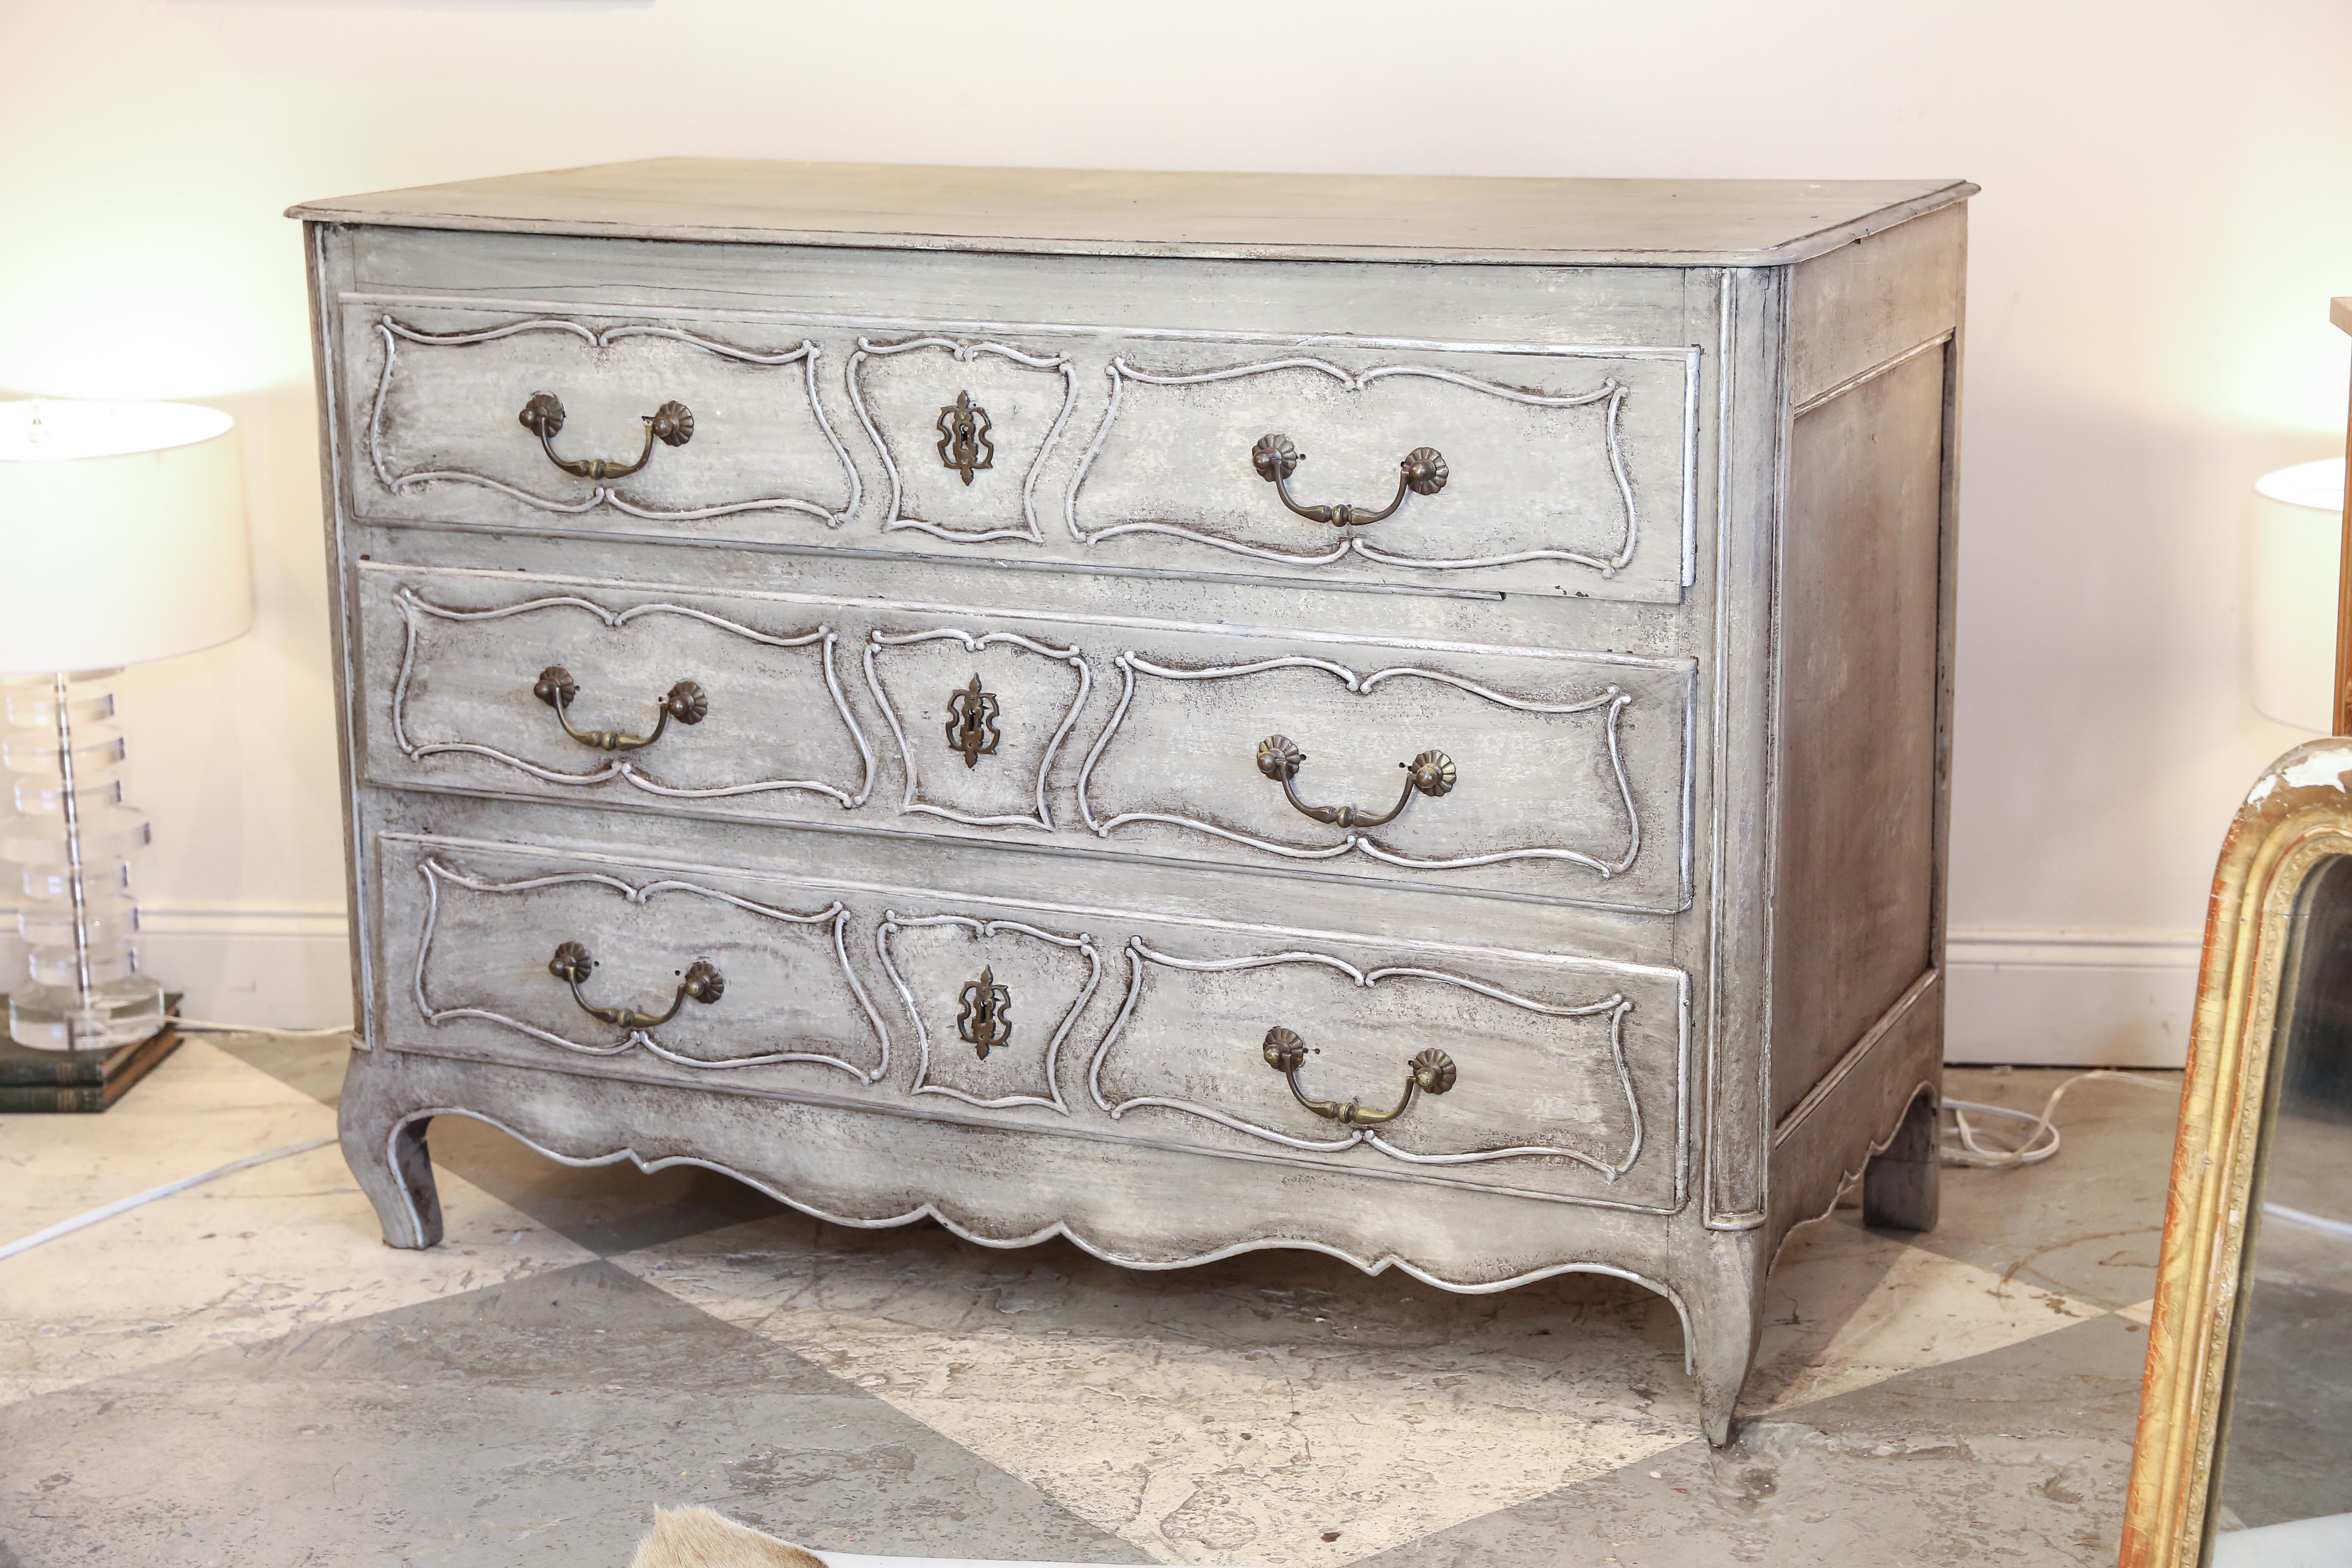 This is an antique Louis XVI style French commode that has been hand-painted in a divine greige with silver accents. The patinated brass hardware and ornate escutcheons complete this stunning chest of drawers. The interior of each drawer has also